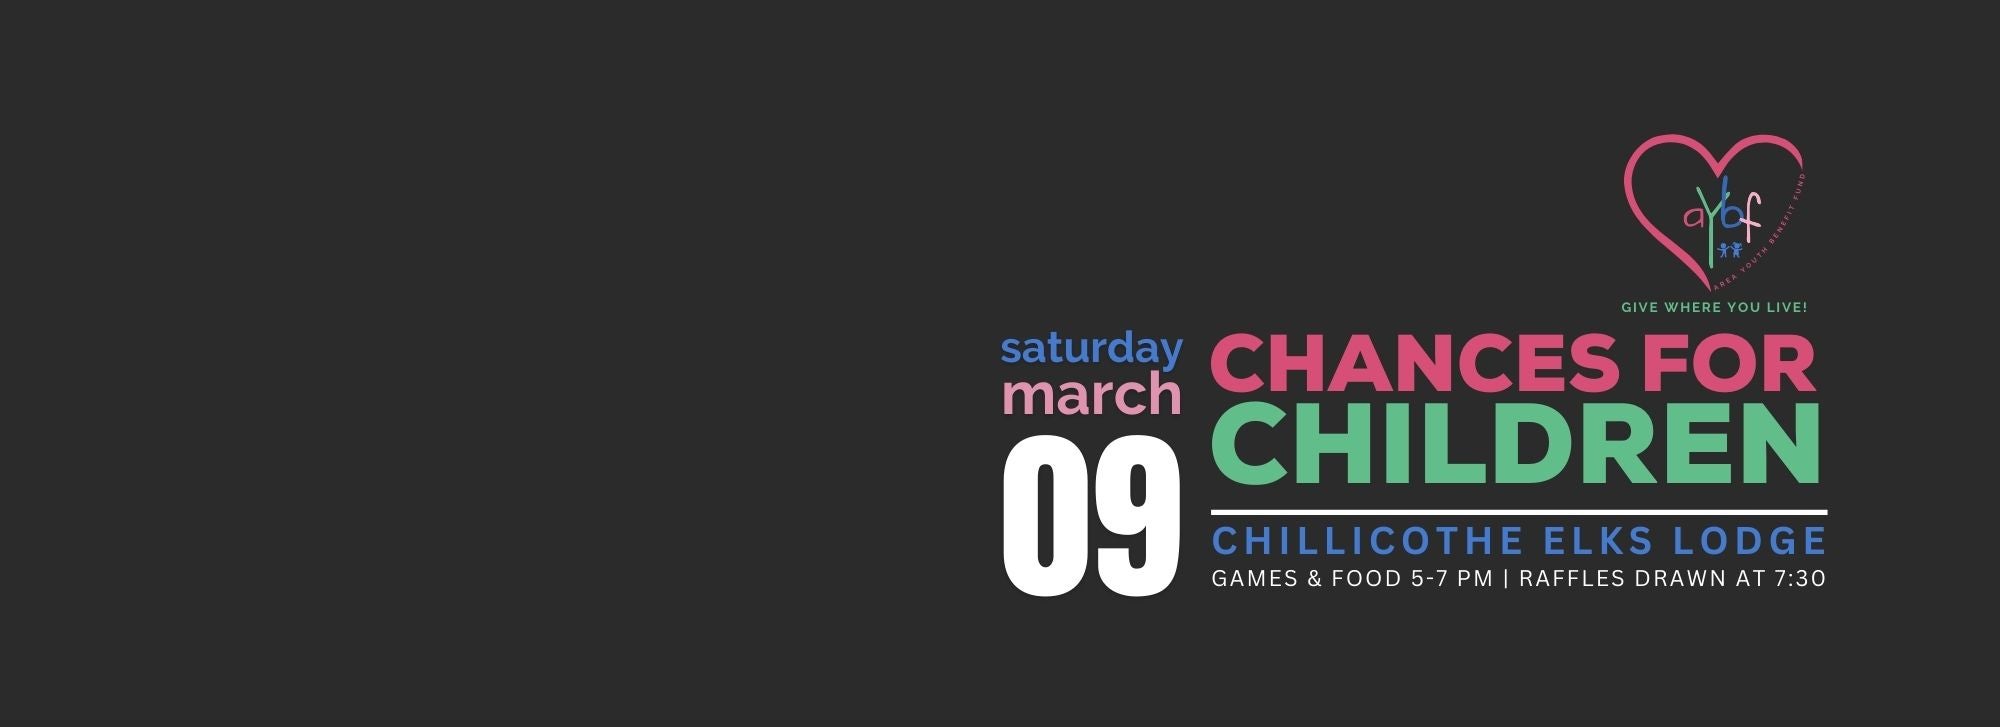 AYBF Chances for Children event March 9